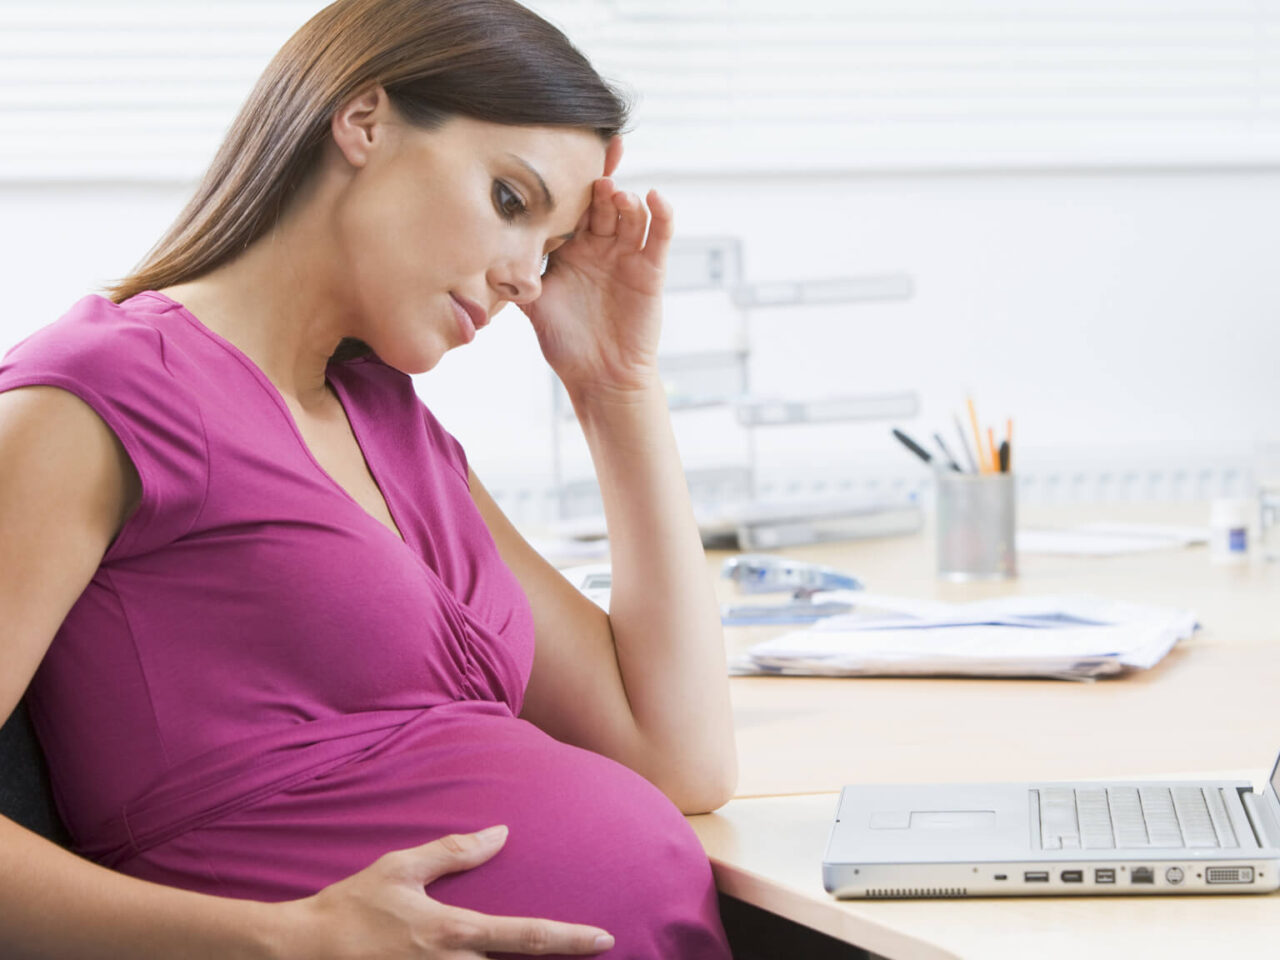 Frustrated pregnant woman sitting at a desk